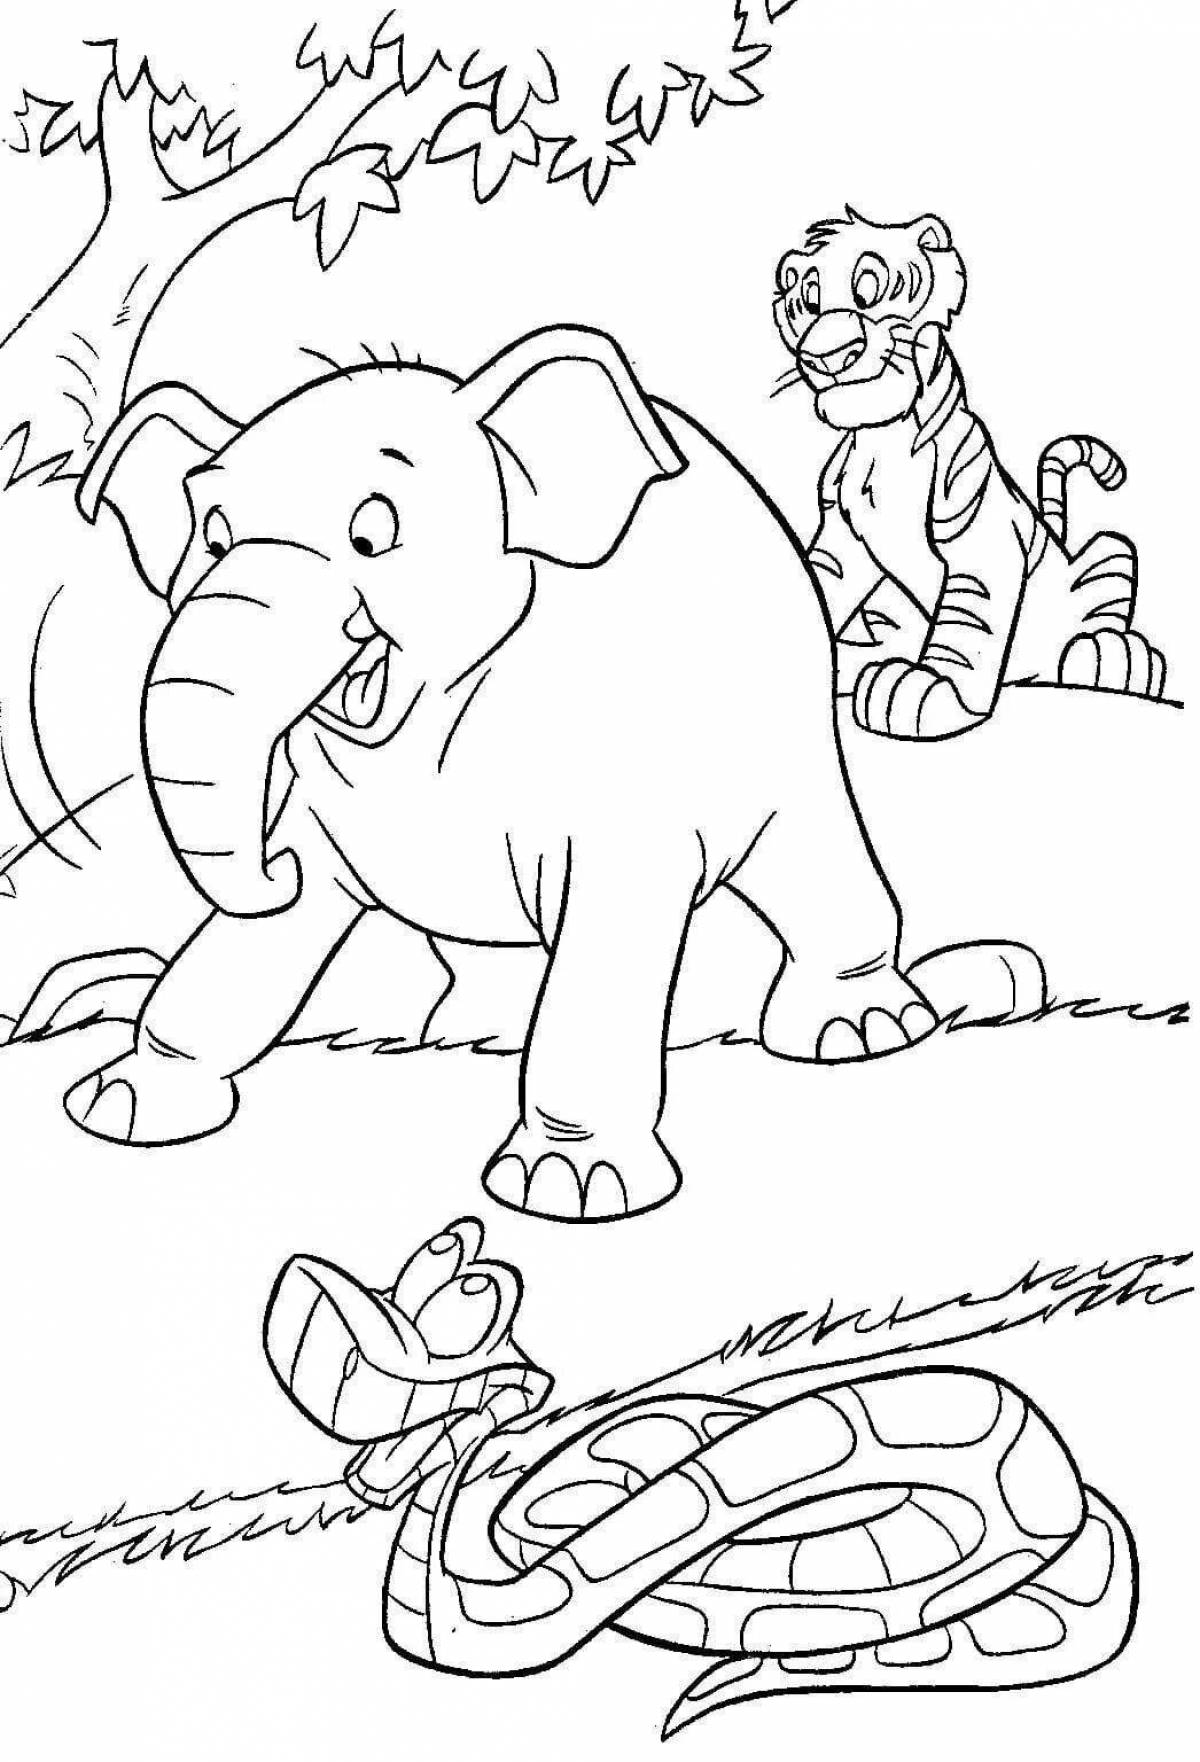 Gorgeous jungle animals coloring book